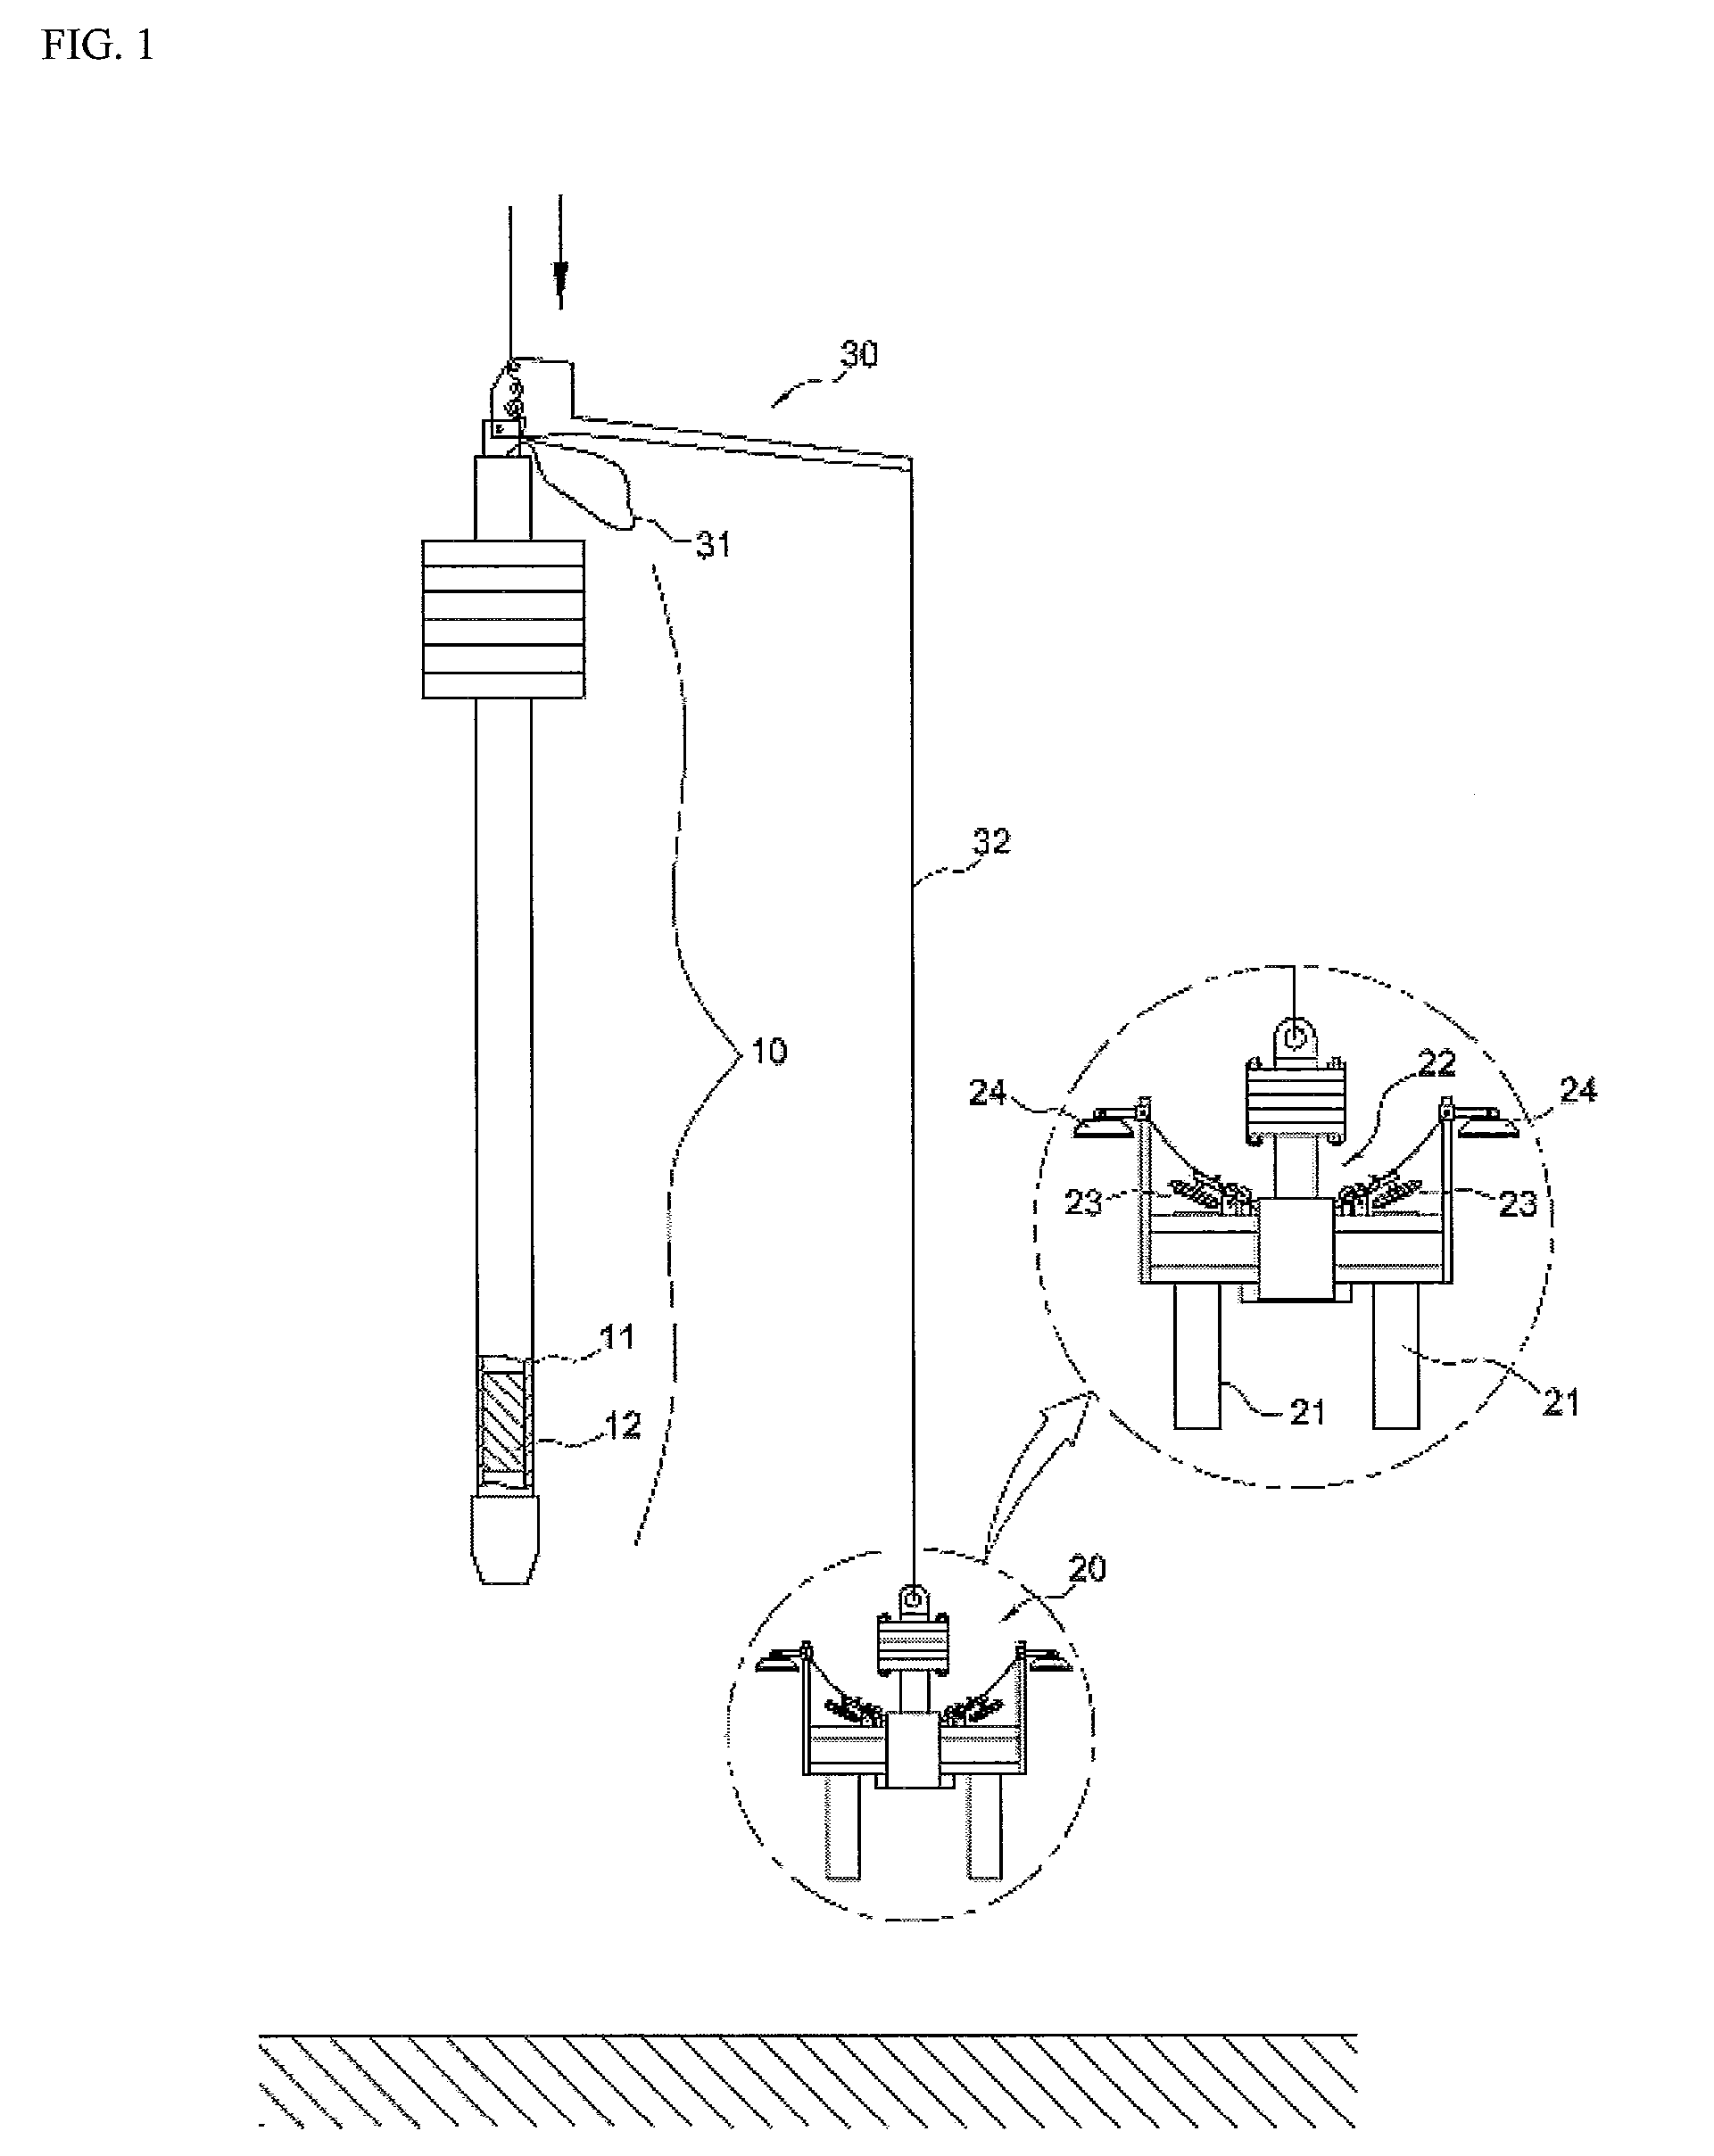 Apparatus for Collecting Marine Deposits